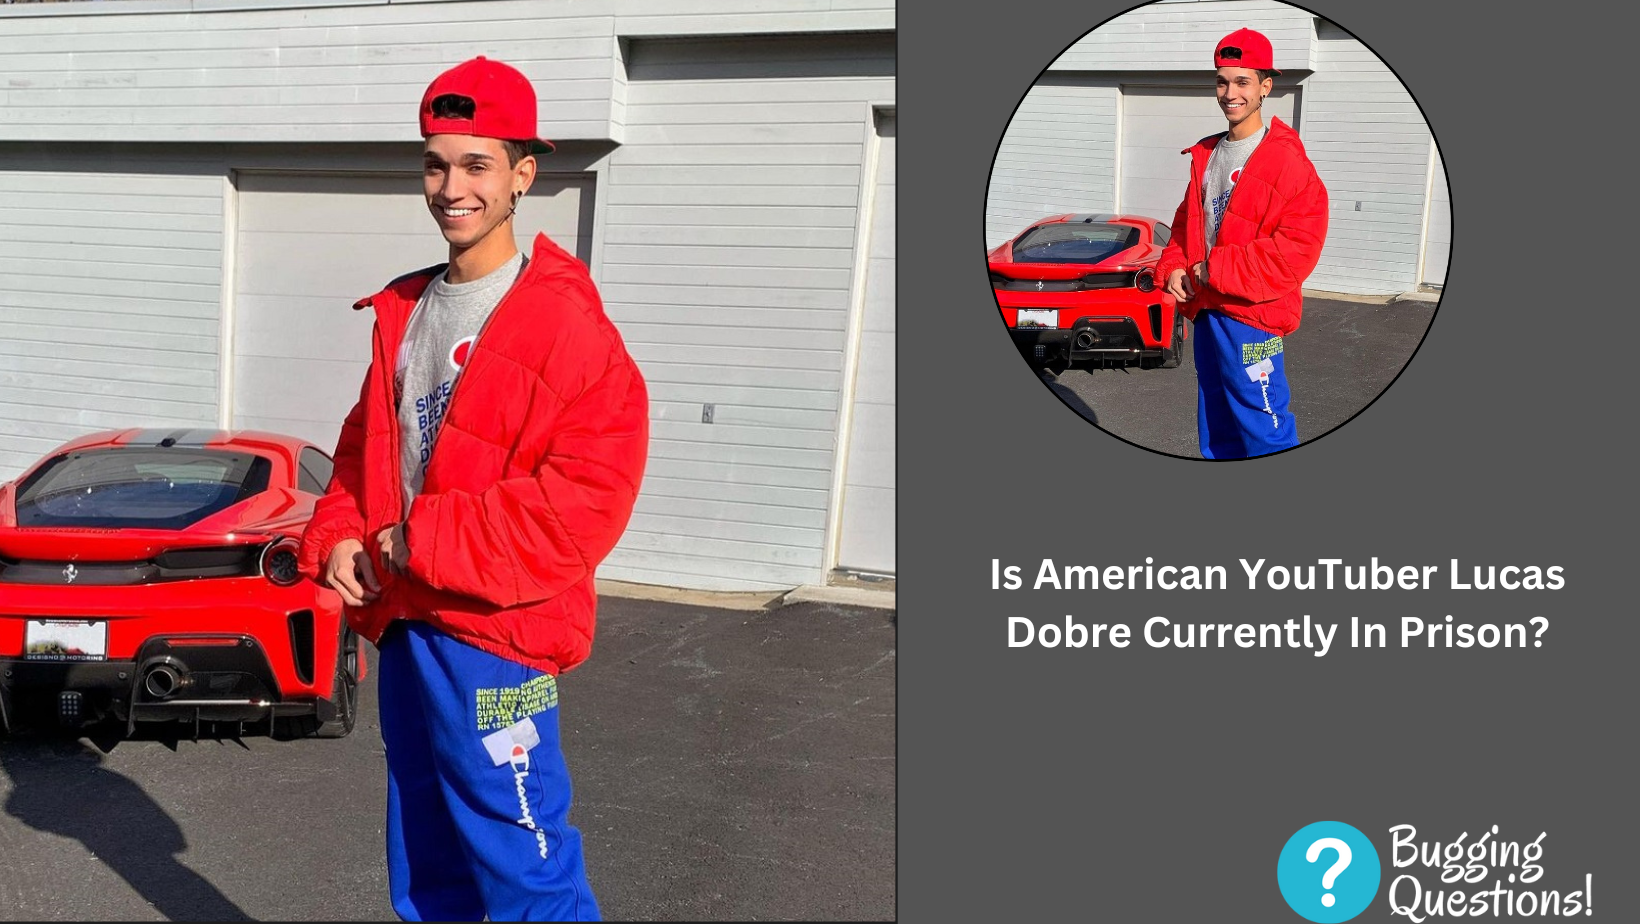 Is American YouTuber Lucas Dobre Currently In Prison?